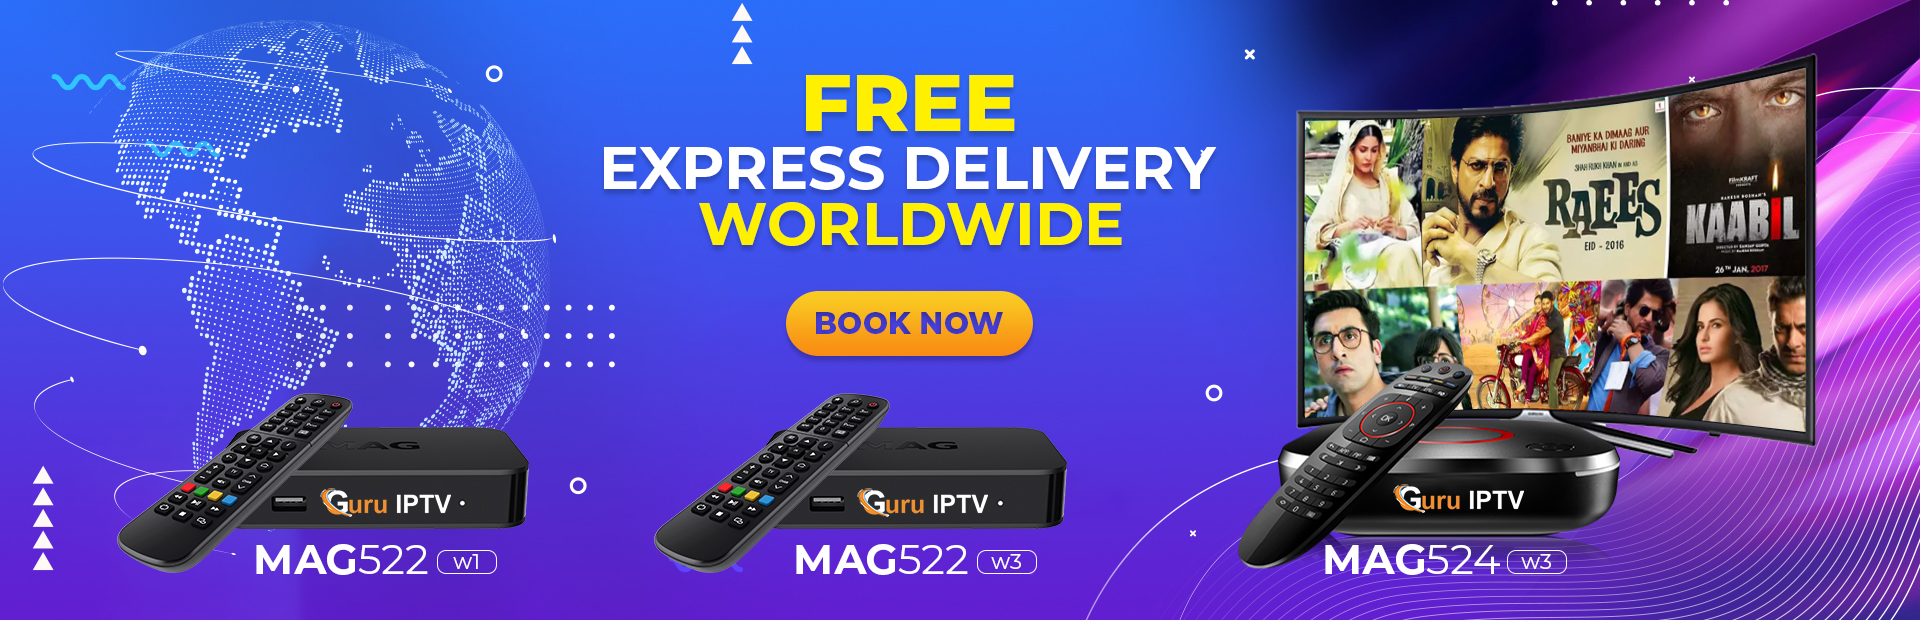 FREE EXPRESS DELIVERY WORLDWIDE